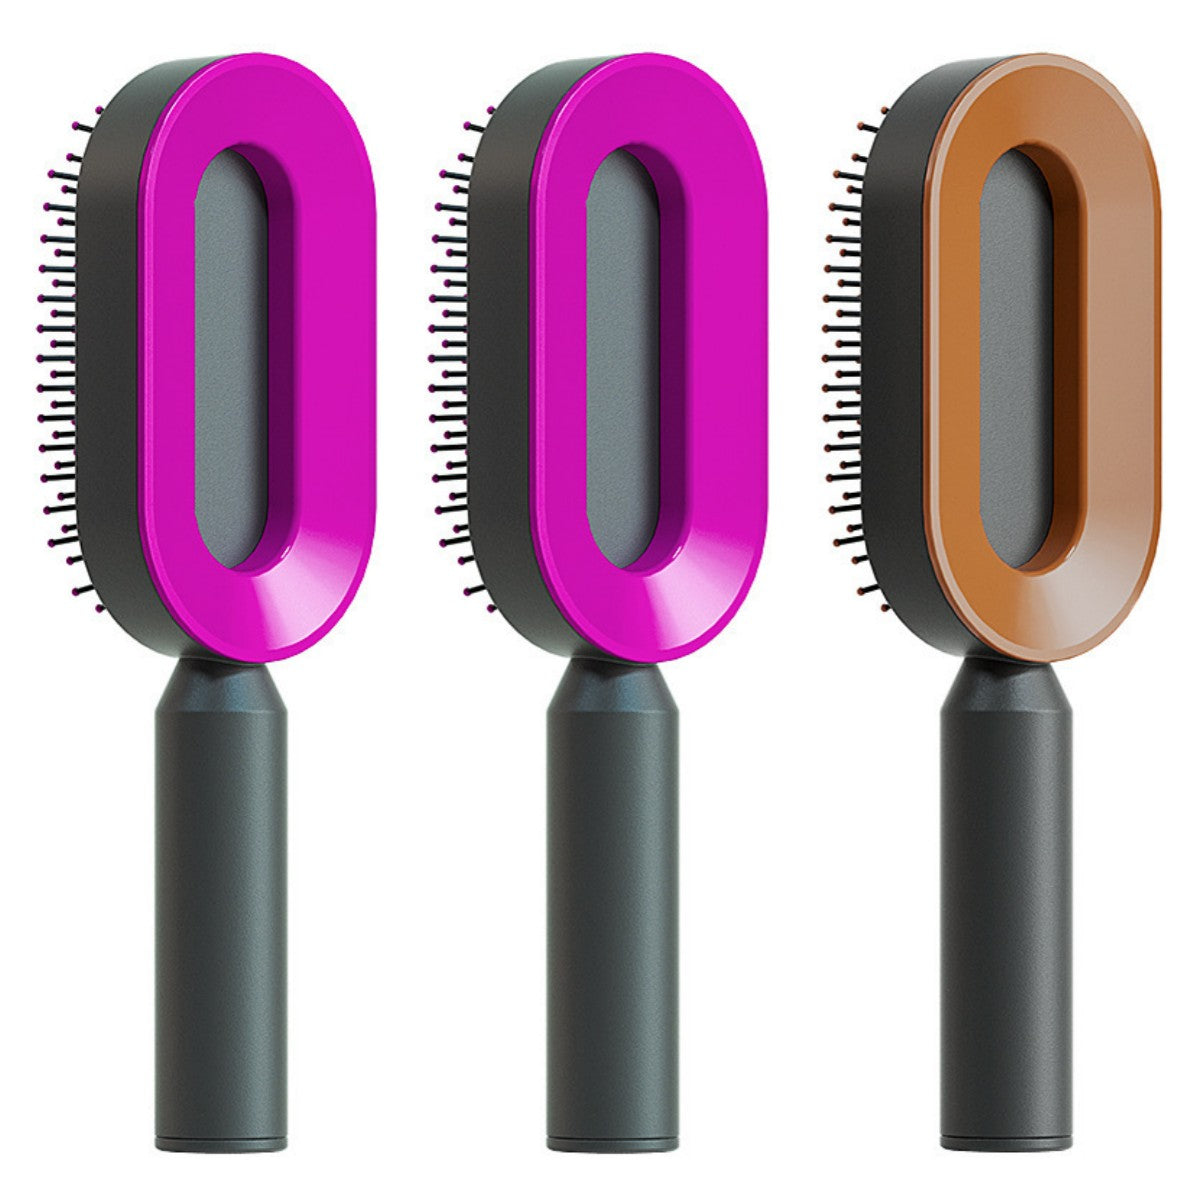 Self Cleaning Hair Brush For Women One-key Cleaning Hair Loss Airbag Massage Scalp Comb Anti-Static Hairbrush Set Y